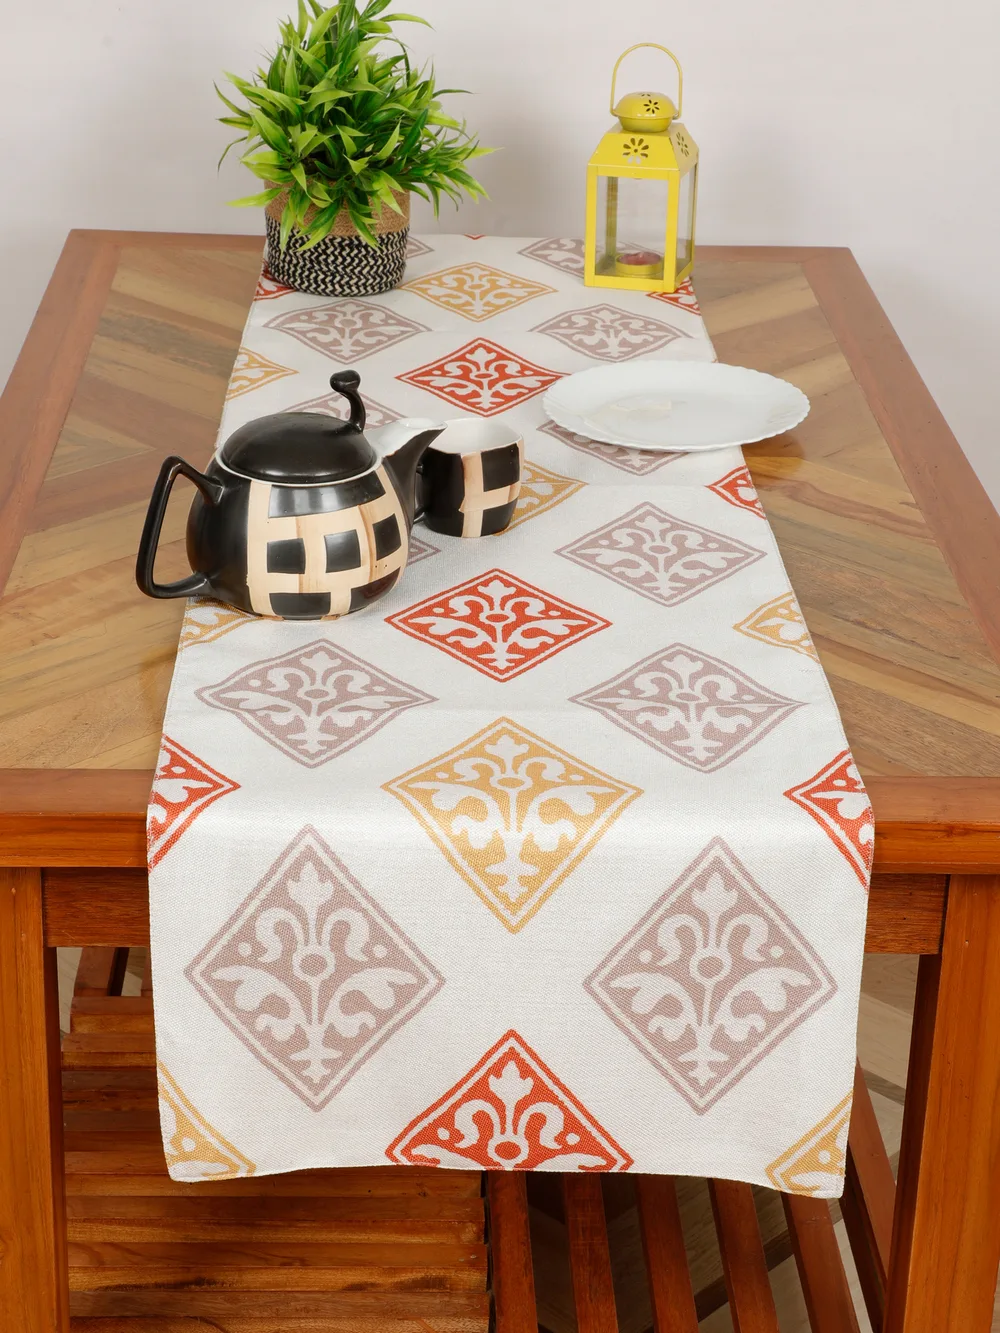 Cotton polyester printed table runner, abstract diamond, floral, 54x14, yellow, red, white